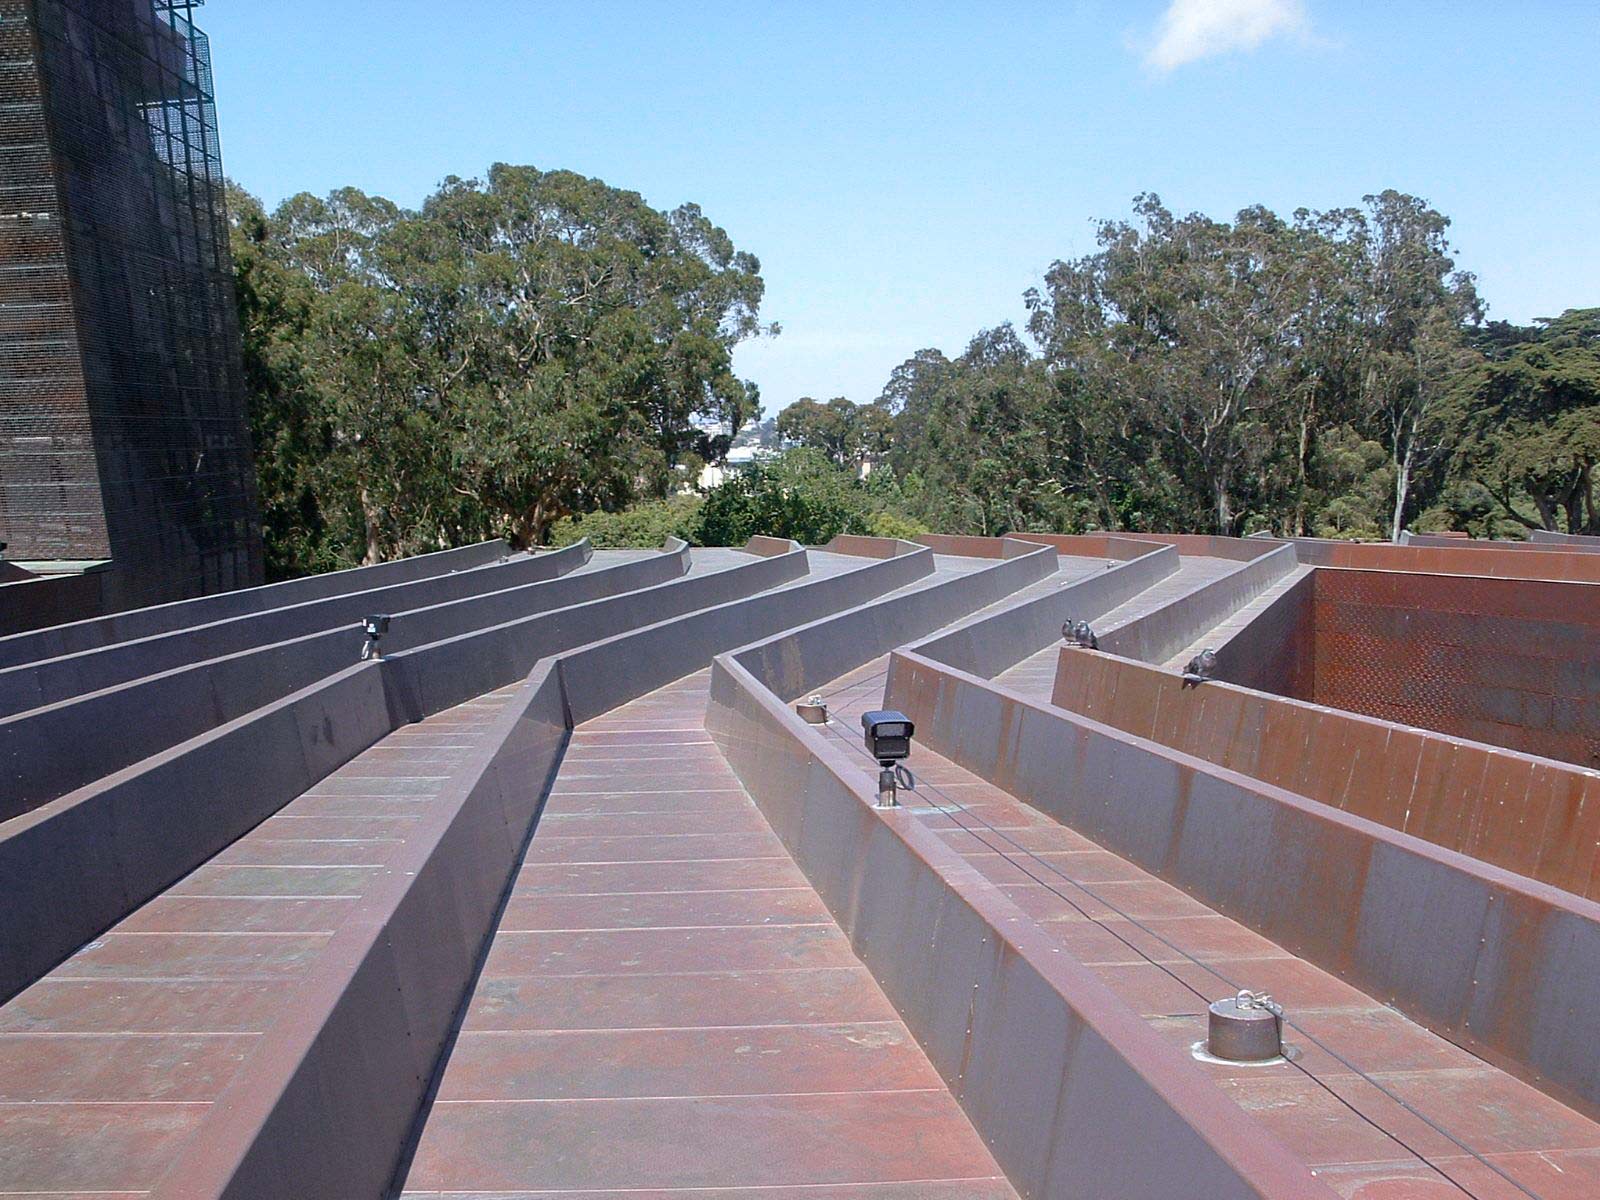 Inverted Seam roof system and channel design for the de Young Museum roof